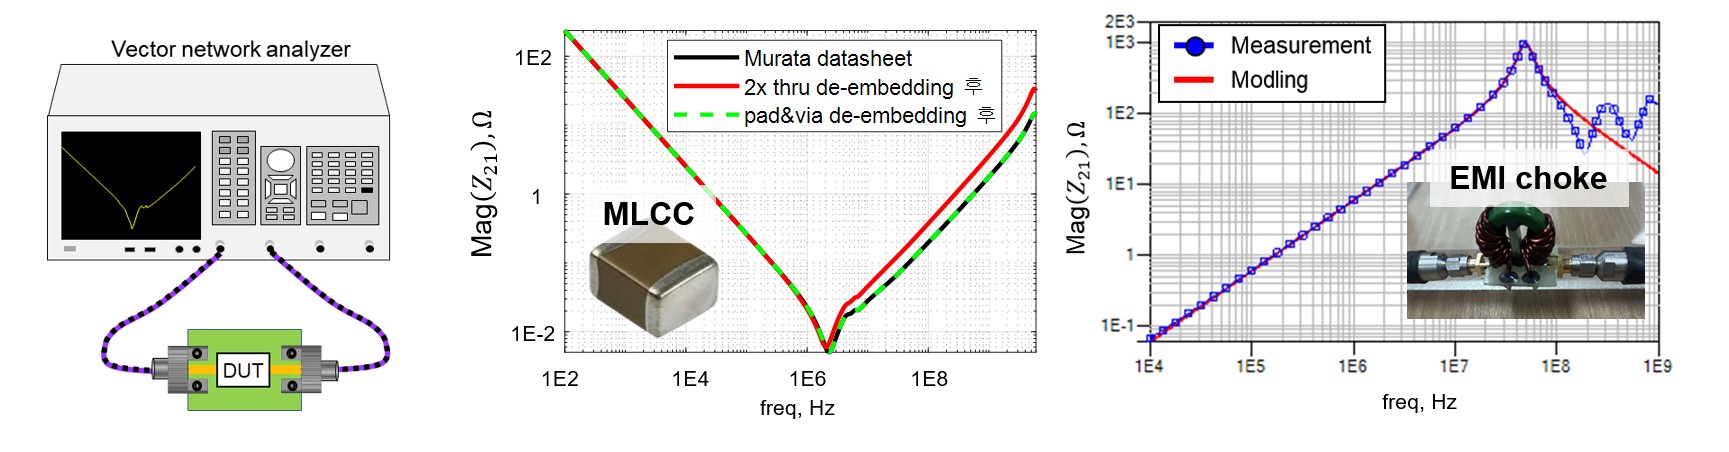 MLCC and EMI Choke Impedance Measurement and Modeling 이미지